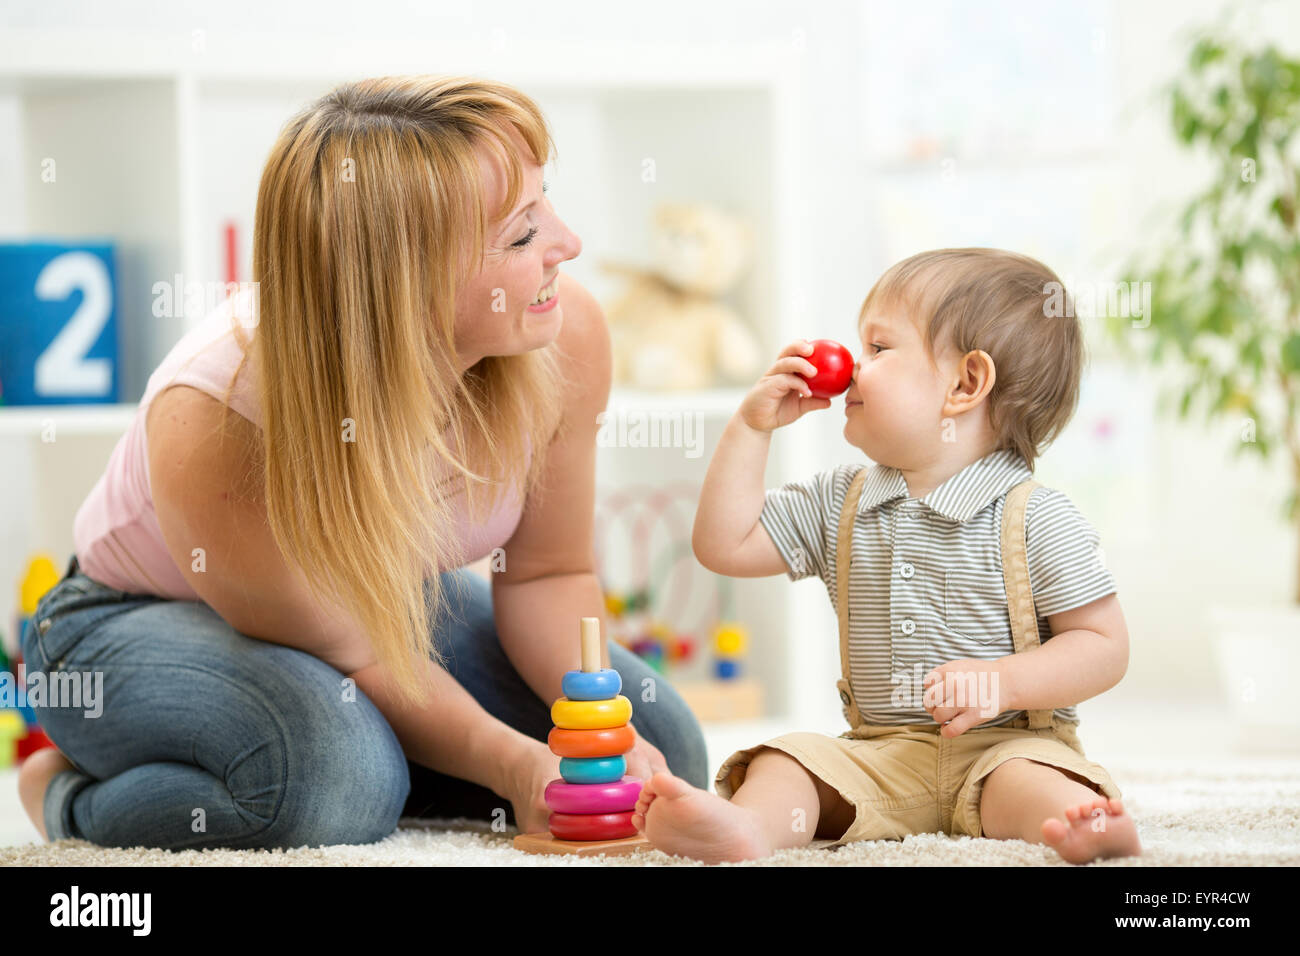 mother with child son play having fun pastime Stock Photo